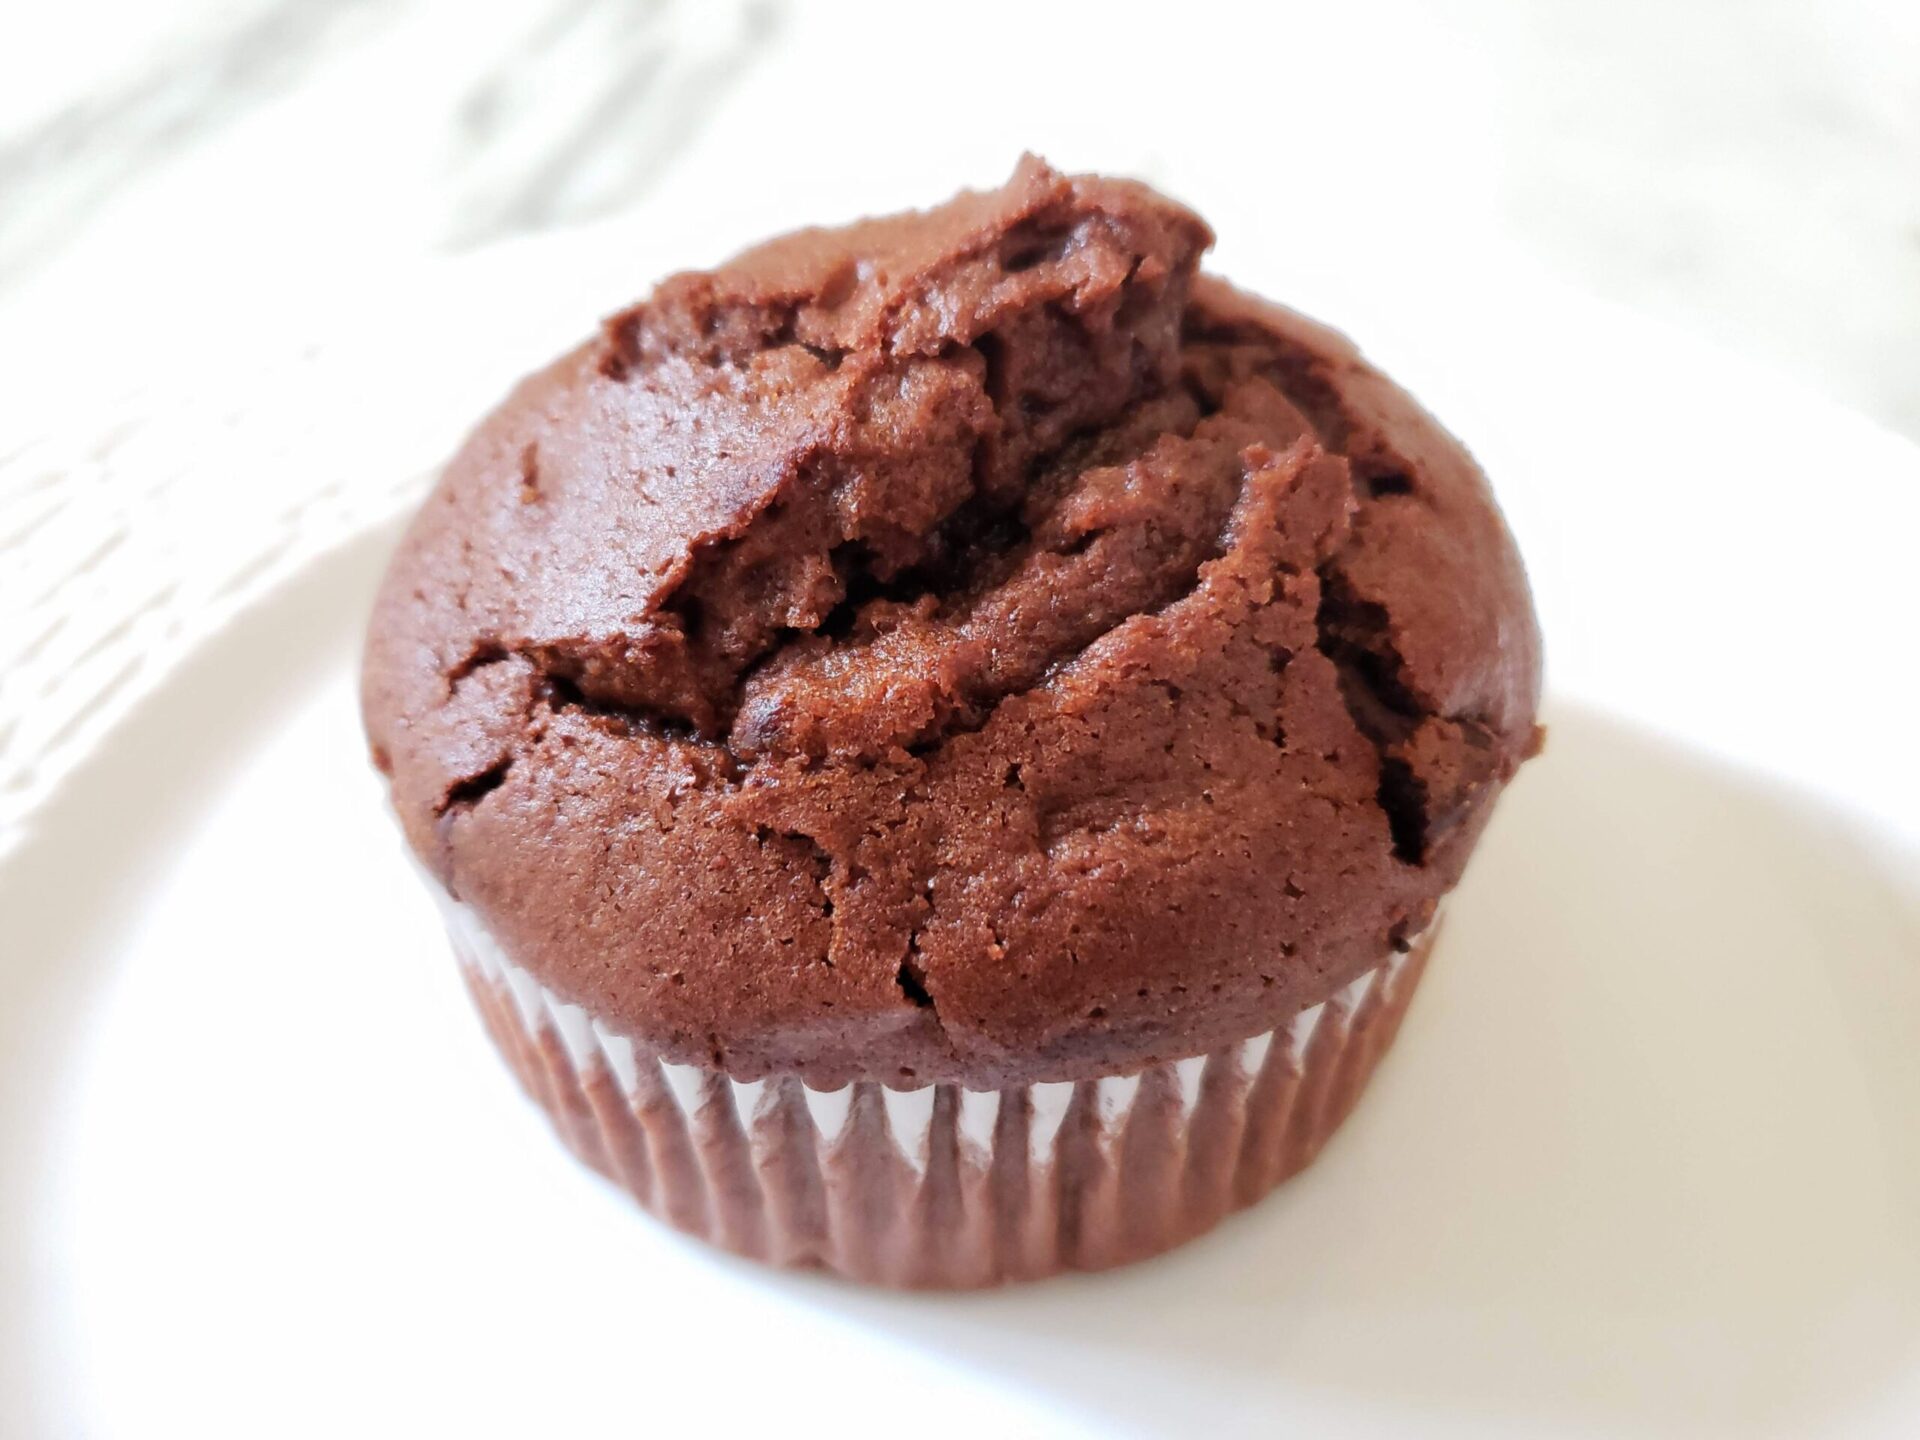 Muffin-from-Costco-Chocolate